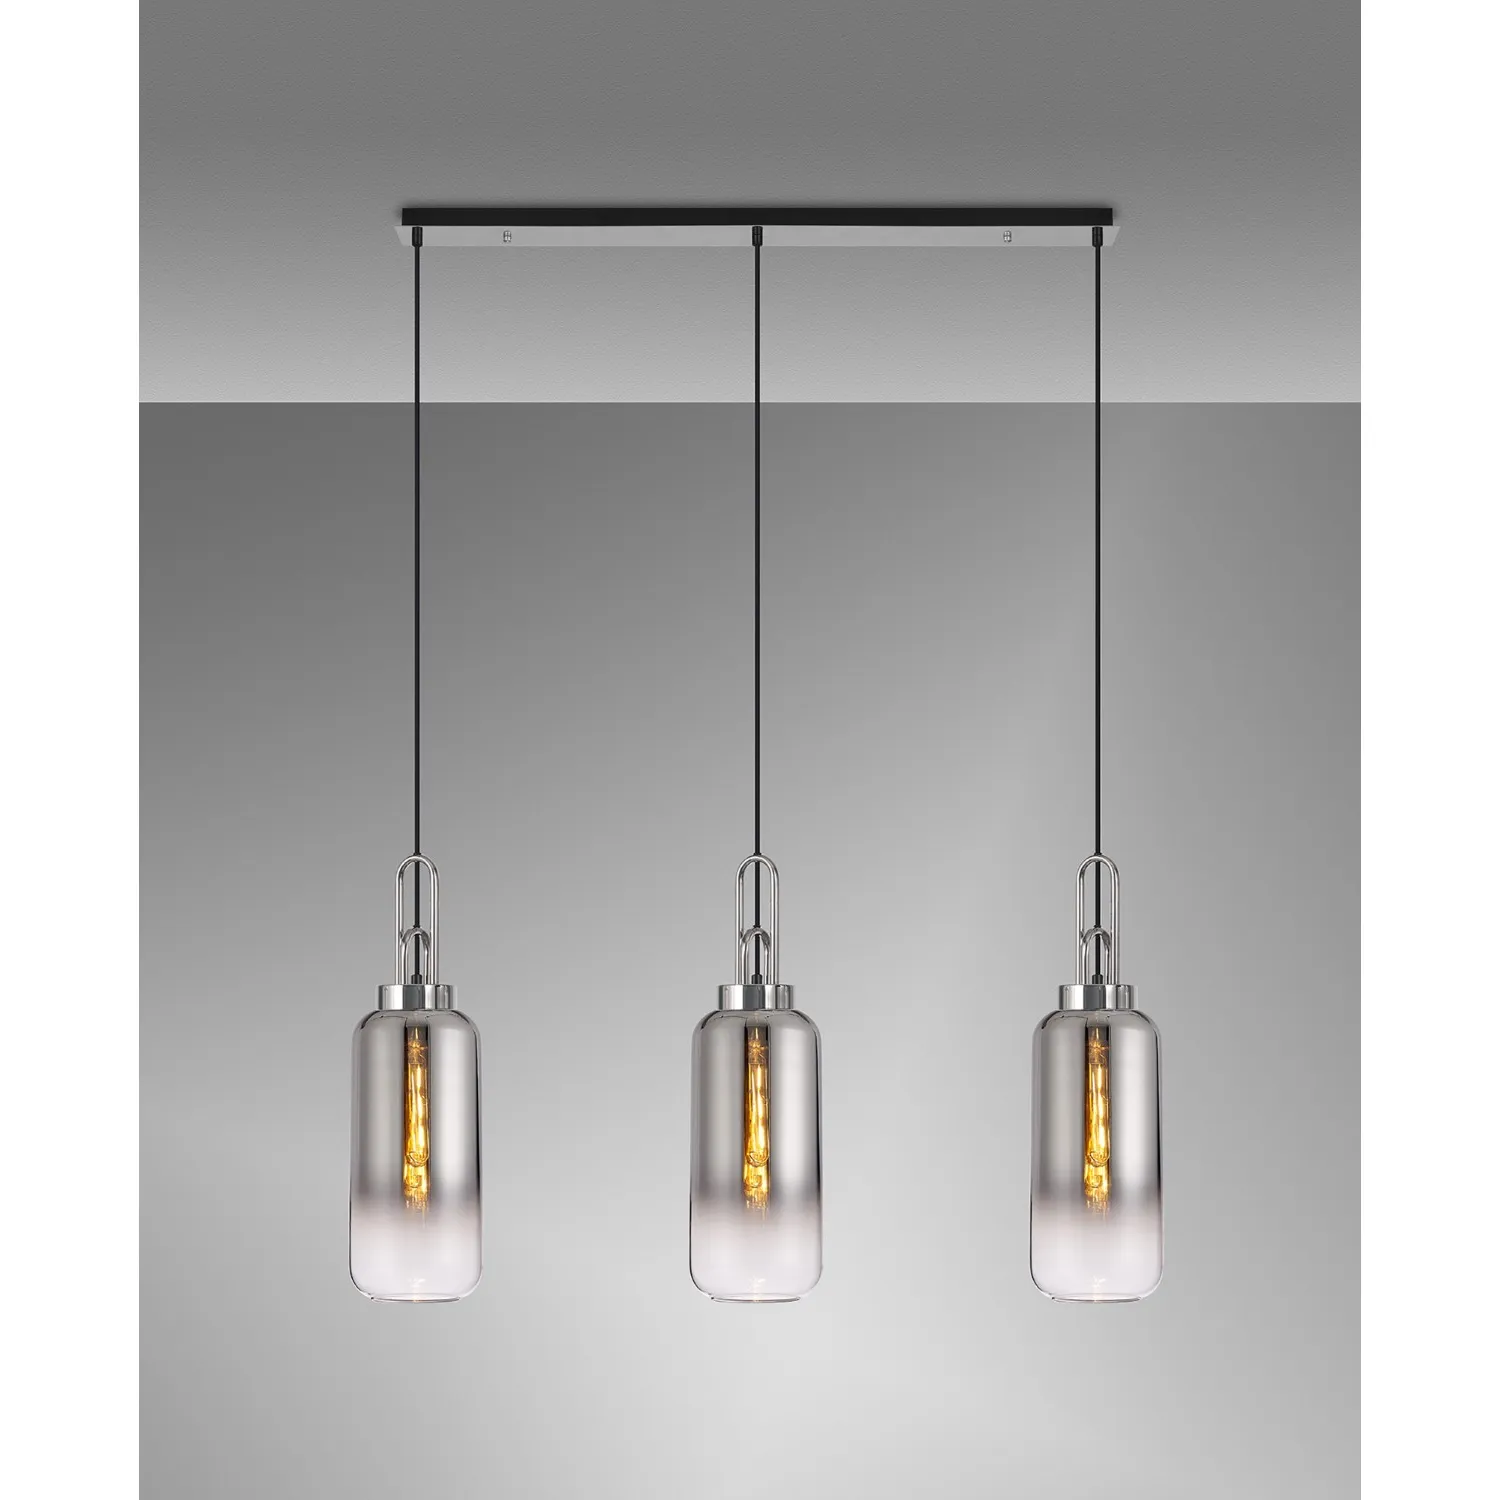 Epsom Linear 3 Light Pendant E27 With 16cm Cylinder Glass, Smoked Clear Polished Nickel Matt Black